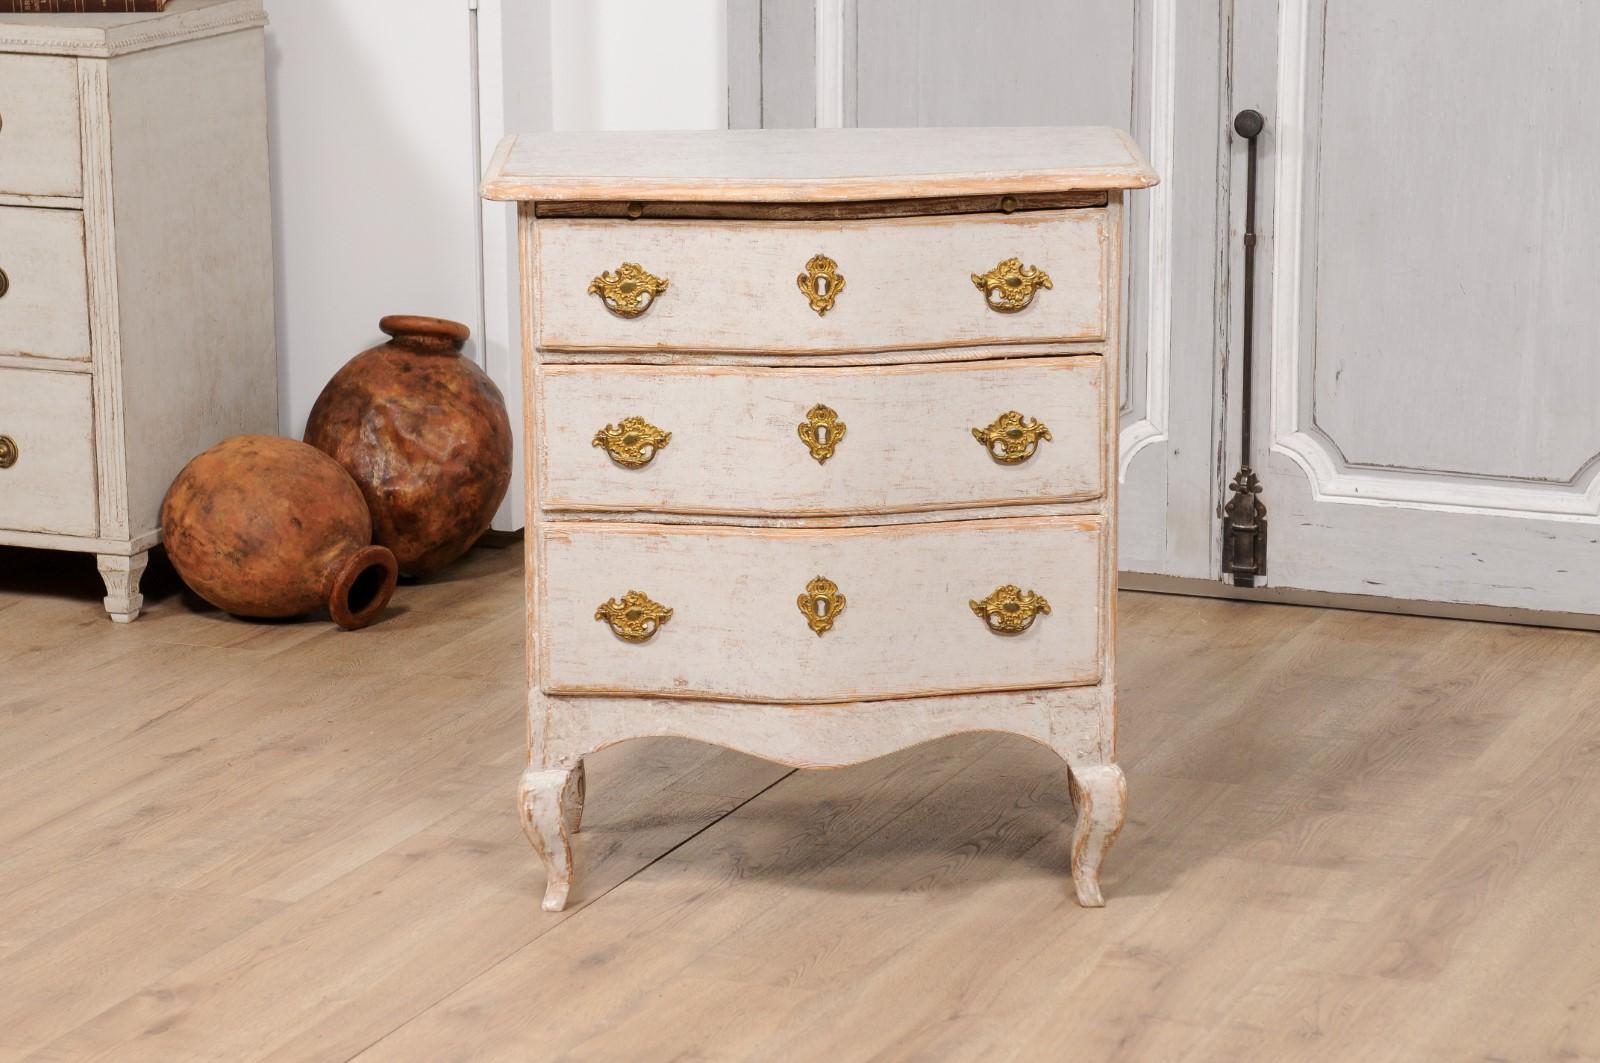 1760s Rococo Period Swedish Light Grey Painted Chest of Drawers with Pull-Out In Good Condition For Sale In Atlanta, GA